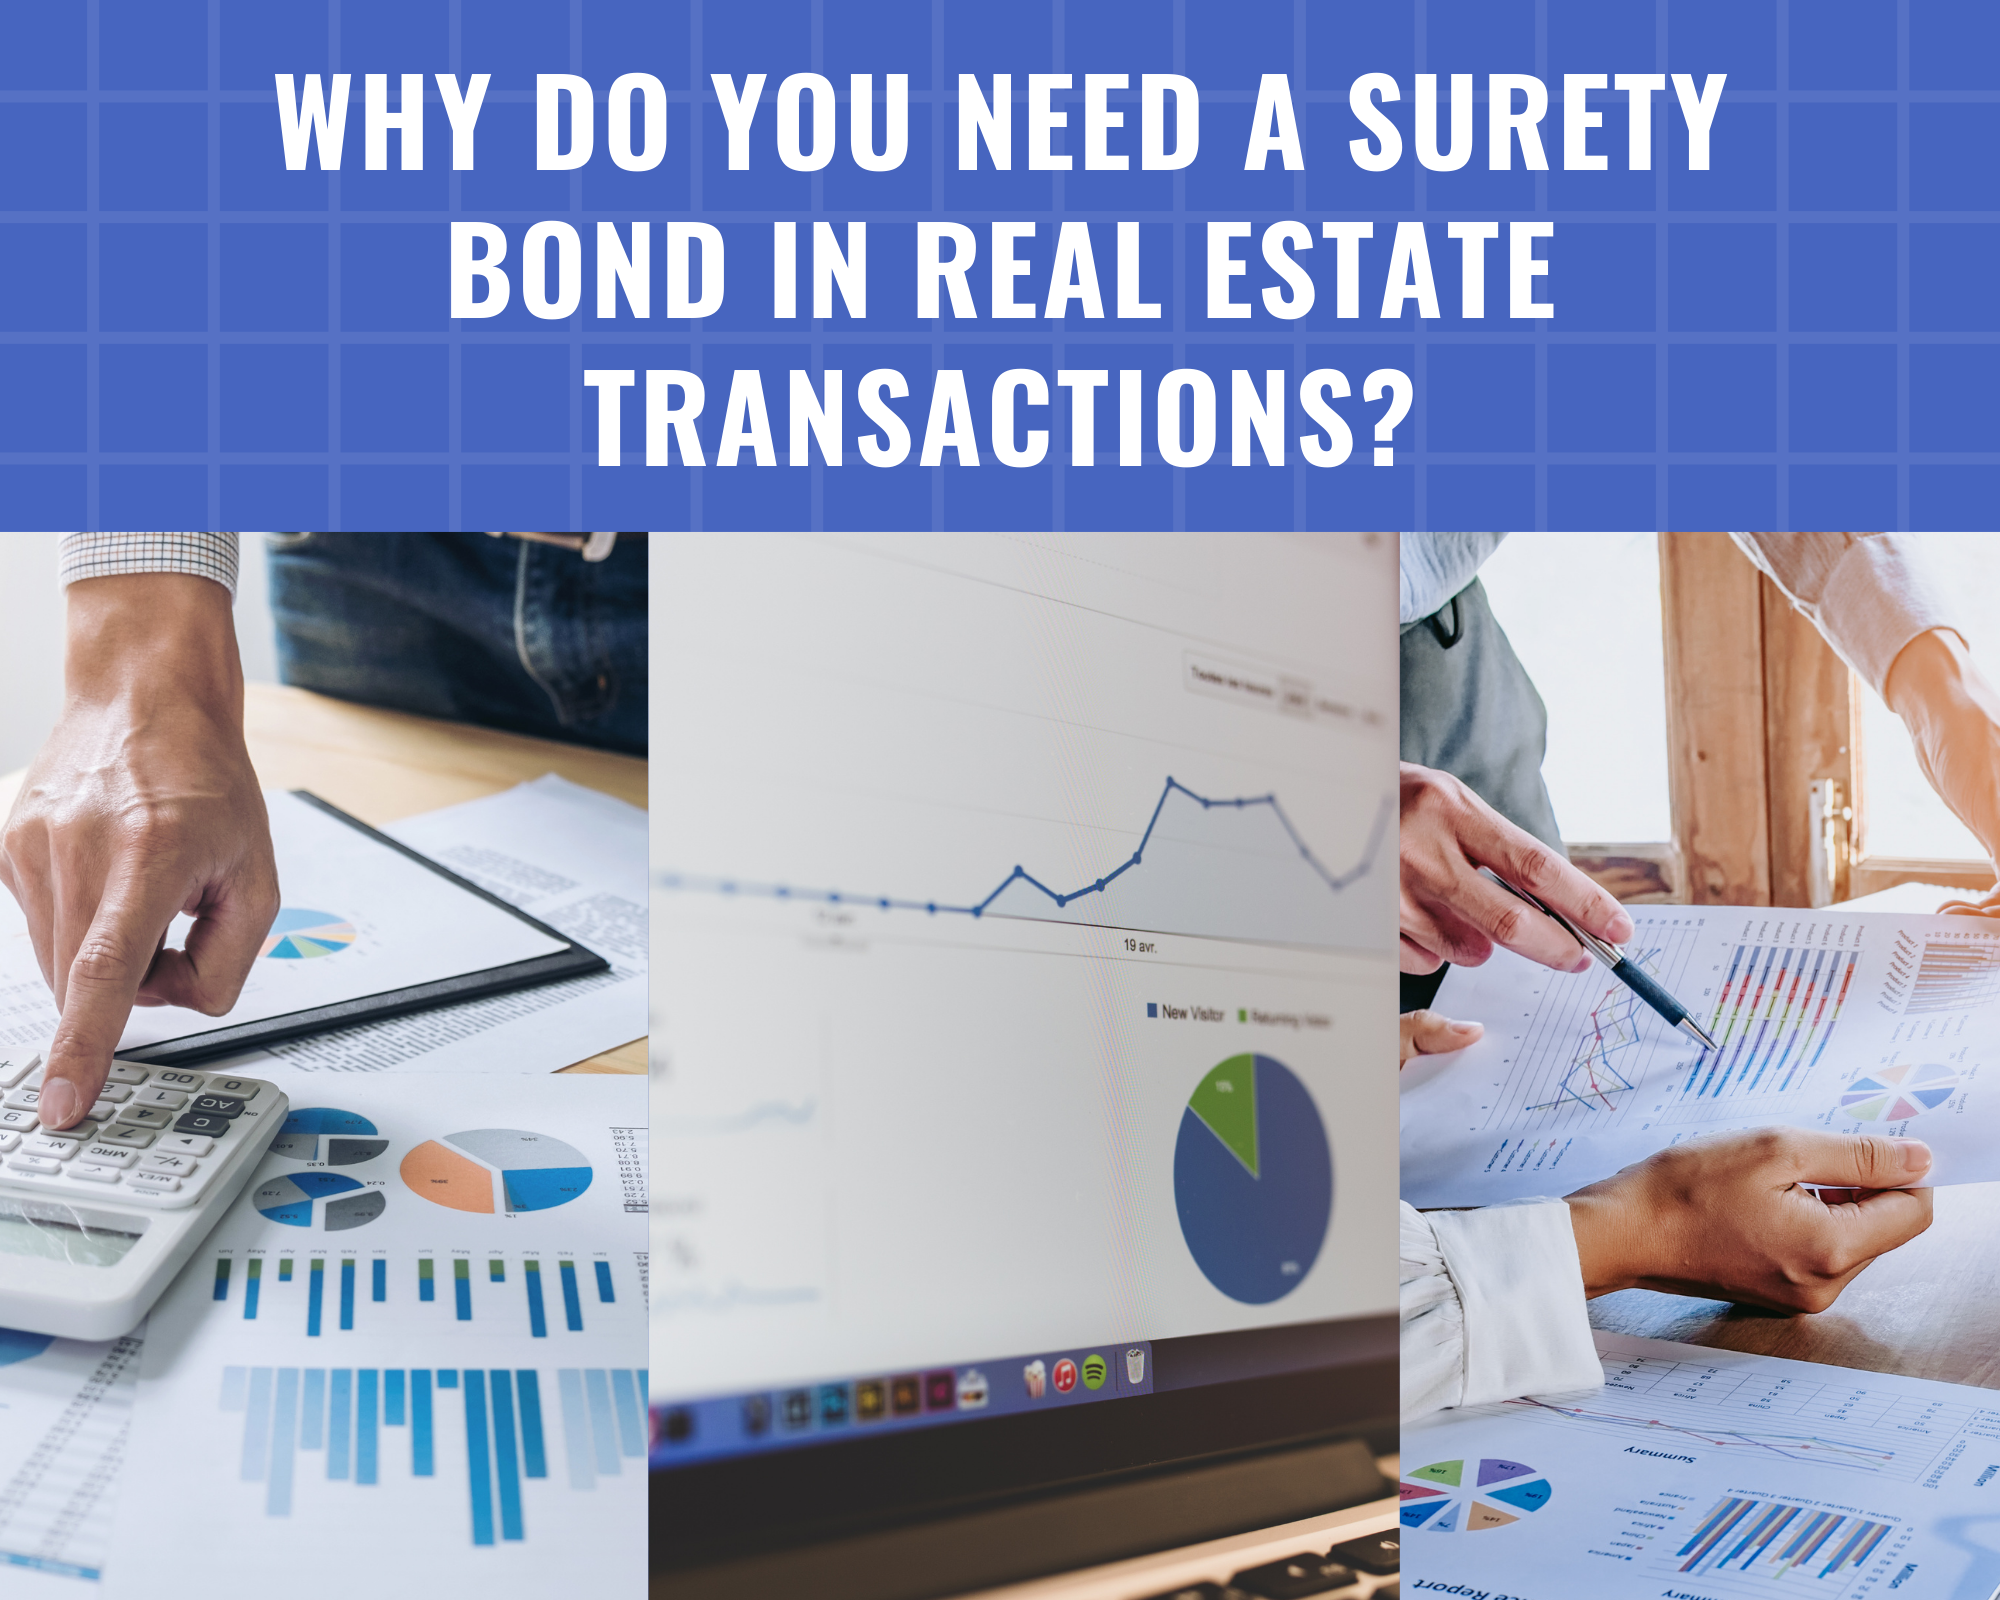 surety bond - what is the purpose of a surety bond for an estate - financial transactions